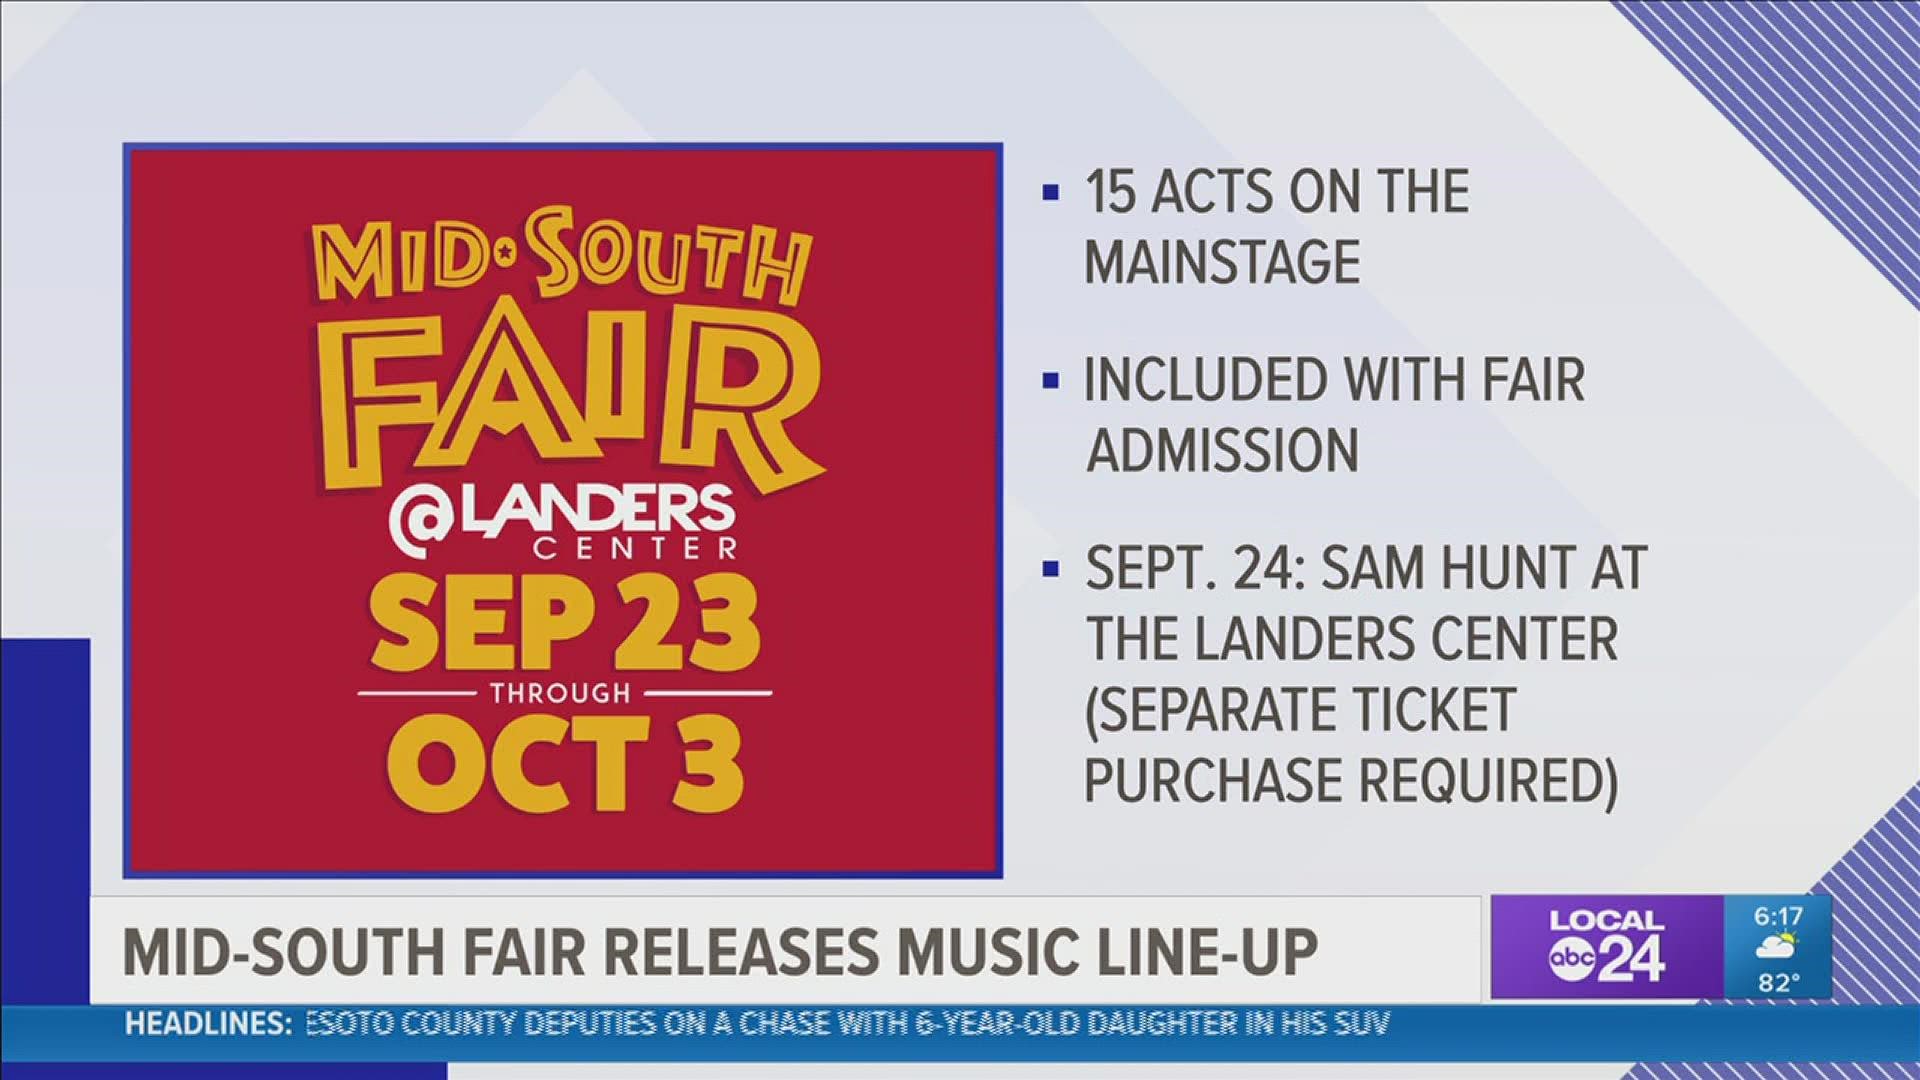 The fair runs September 23, 2021 through October 3, 2021 at the Landers Center in Southaven, Mississippi.